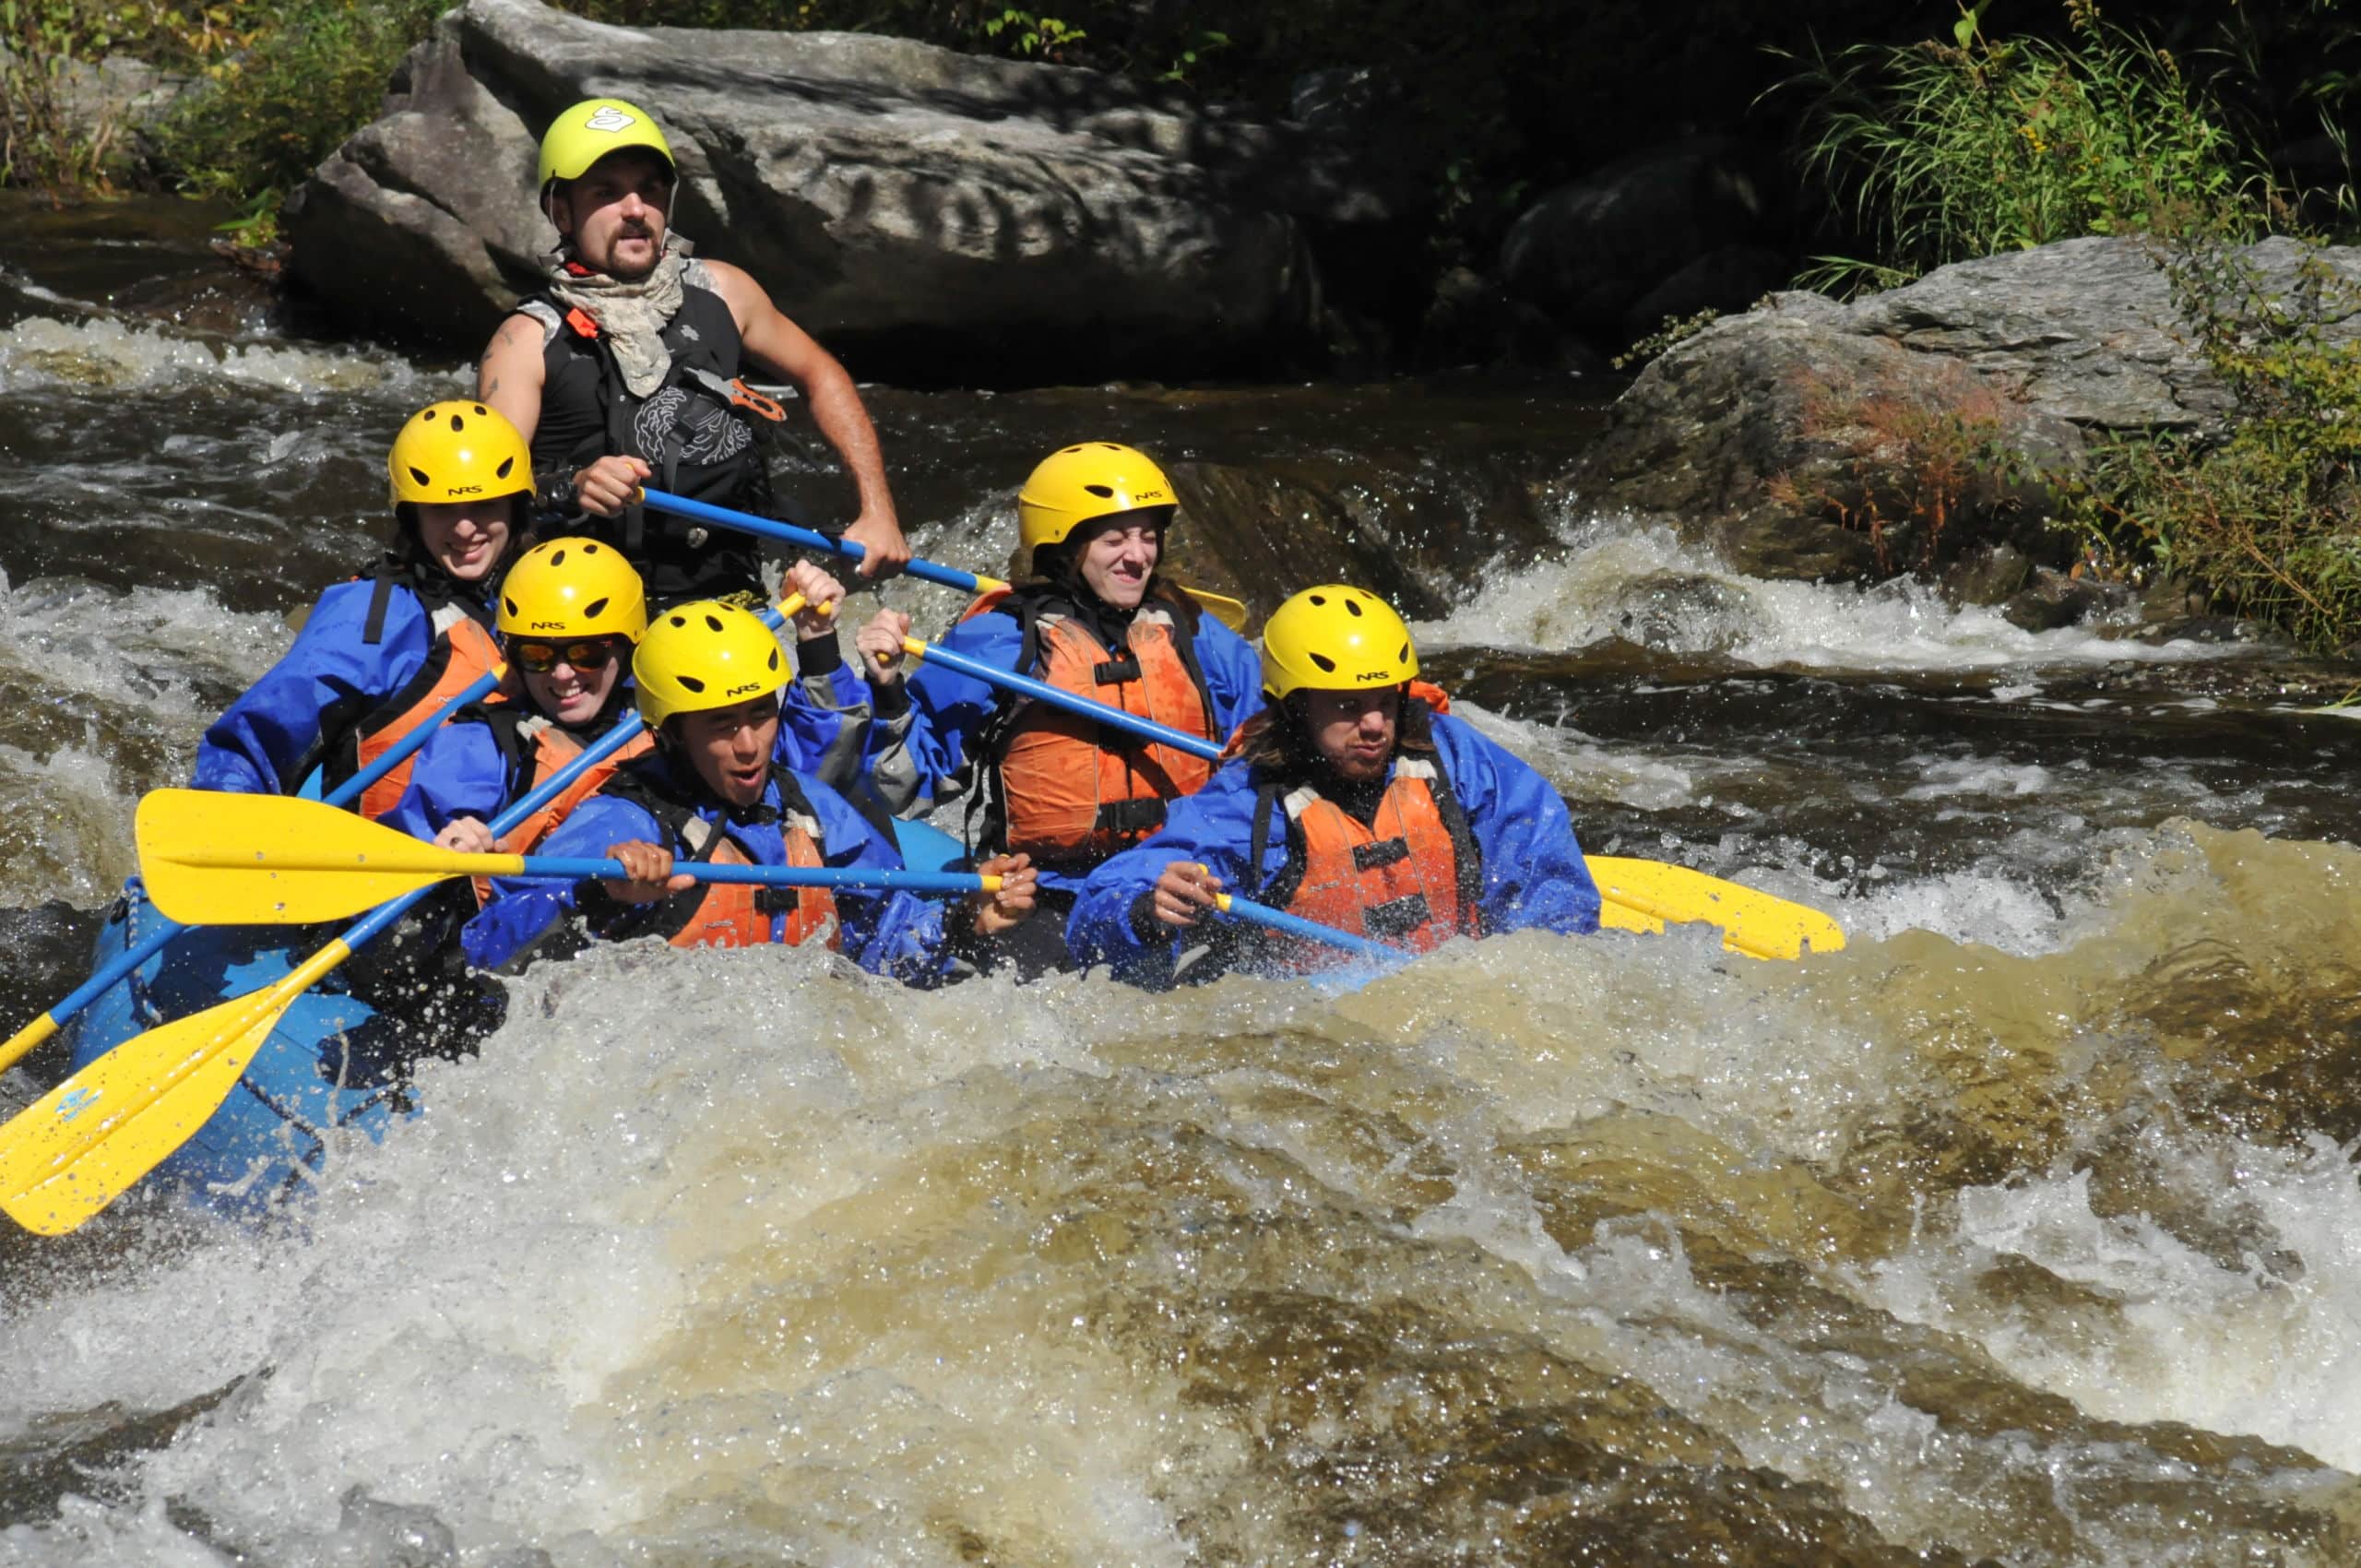 Group of rafters and guide headed through a section of whitewater on the Zoar Gap